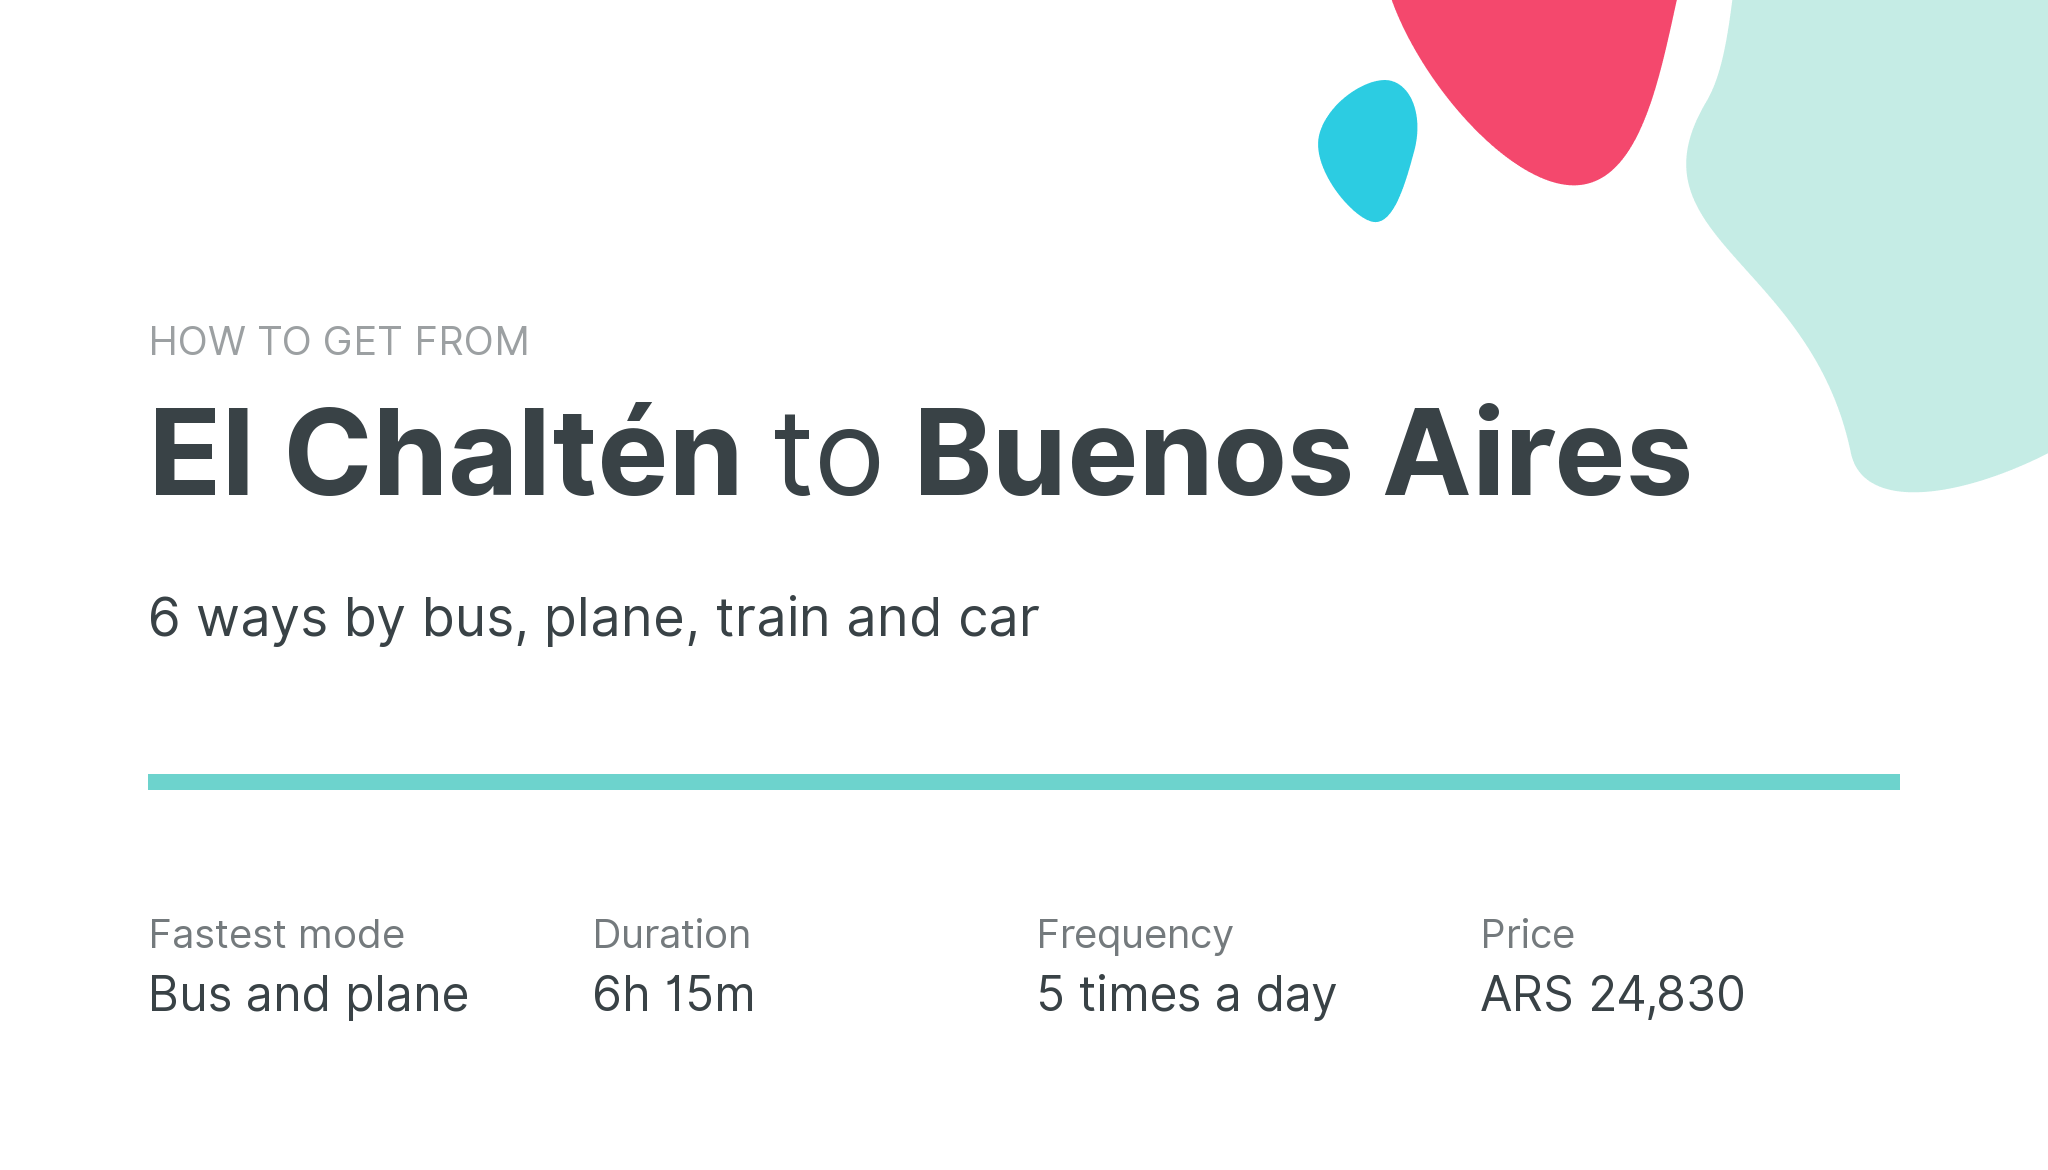 How do I get from El Chaltén to Buenos Aires